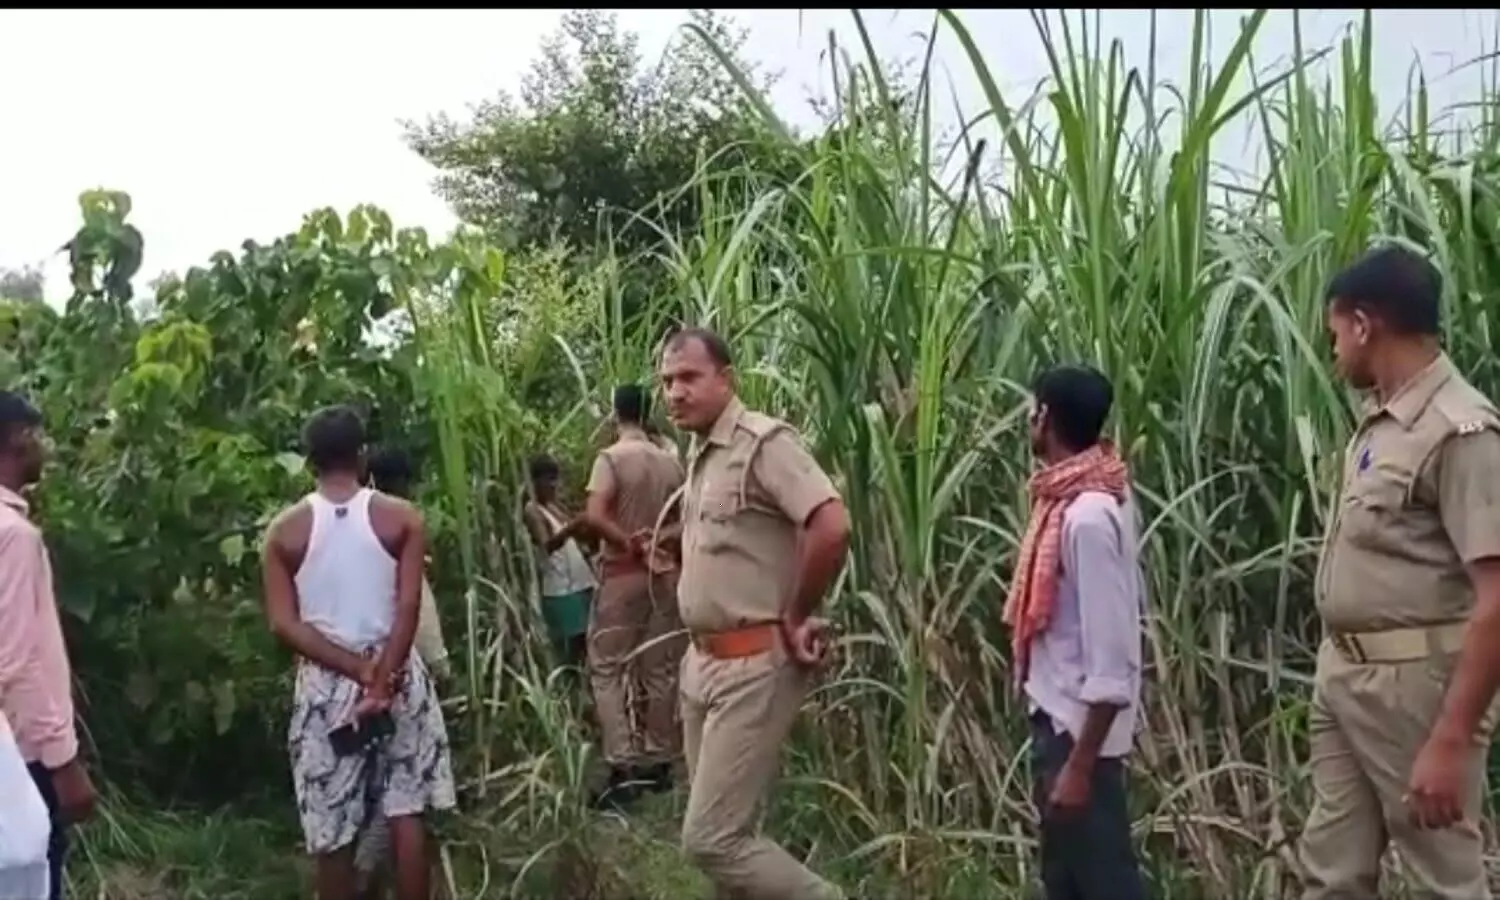 A dead body found of youth in sugarcane field